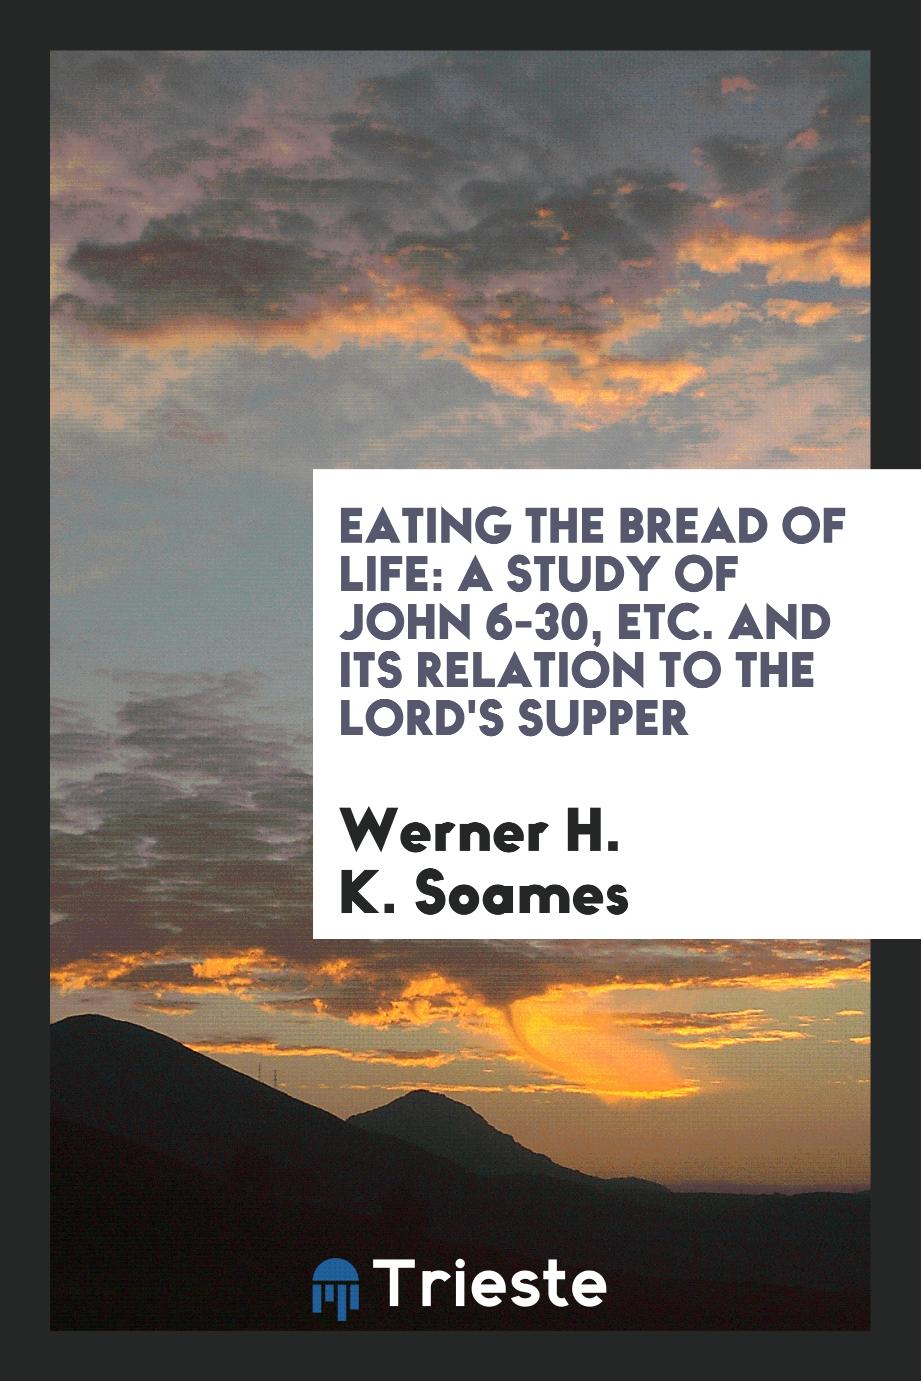 Eating the Bread of Life: a study of John 6-30, etc. and its relation to the Lord's Supper